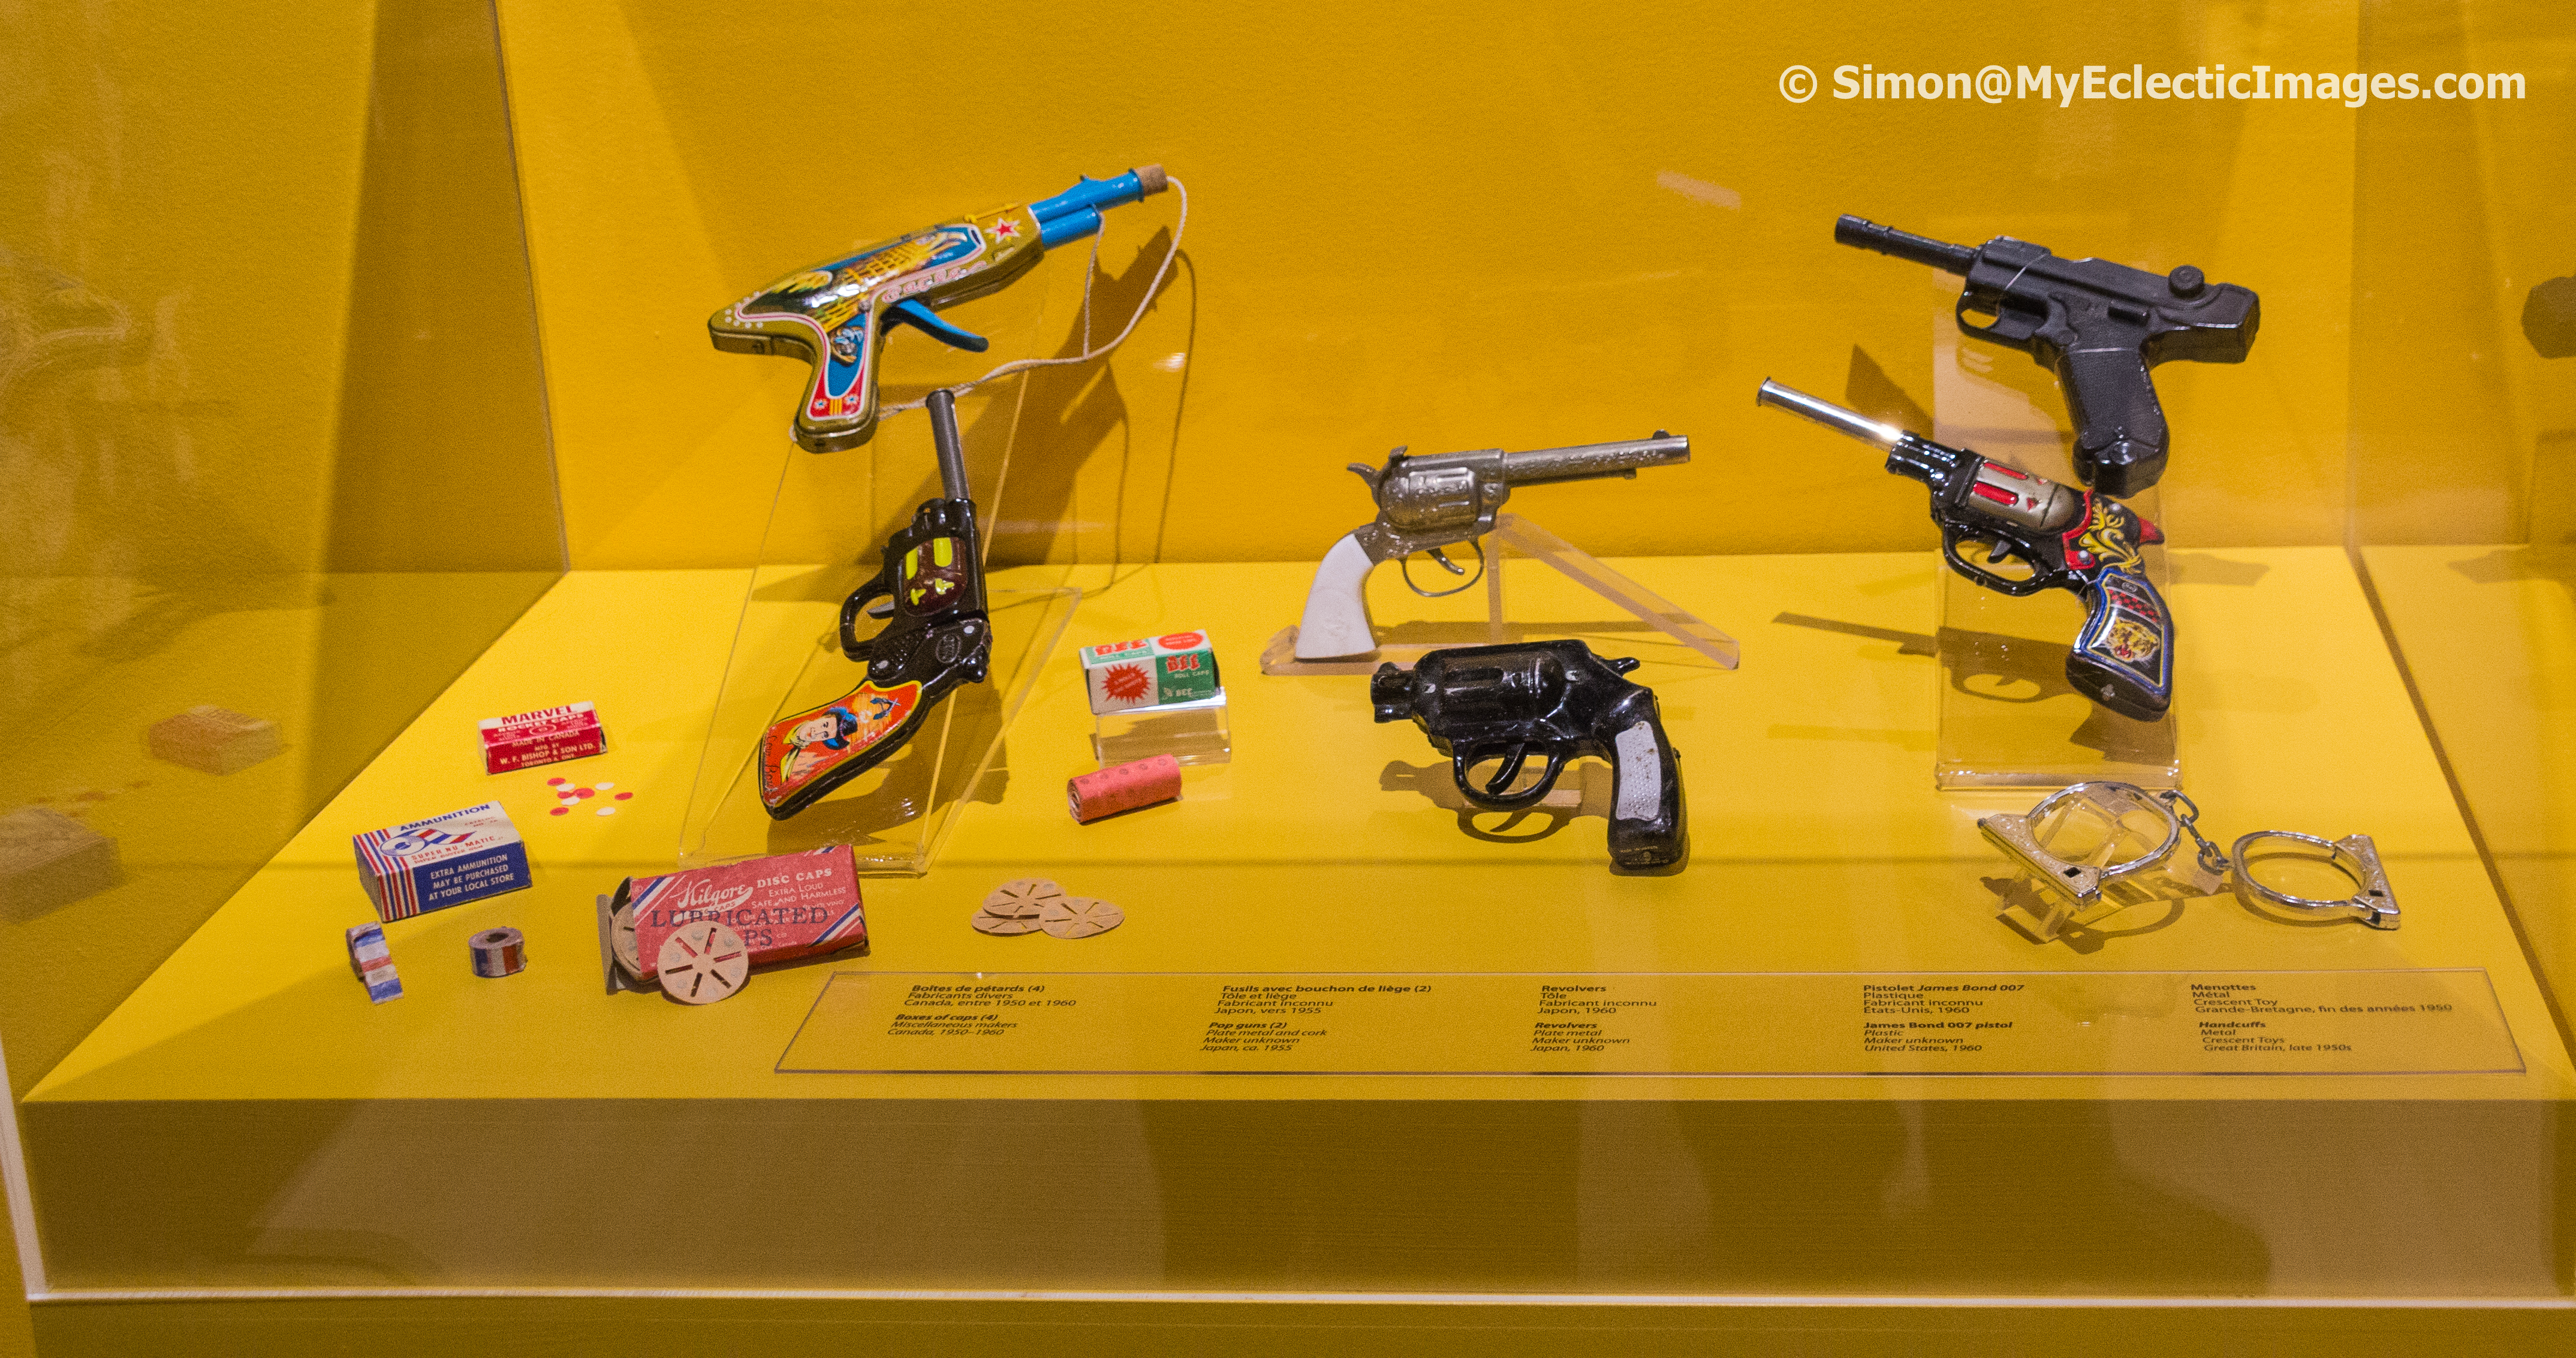 A Display of Toy Guns Spanning More than 50 Years Quebec Museum of Folk Culture